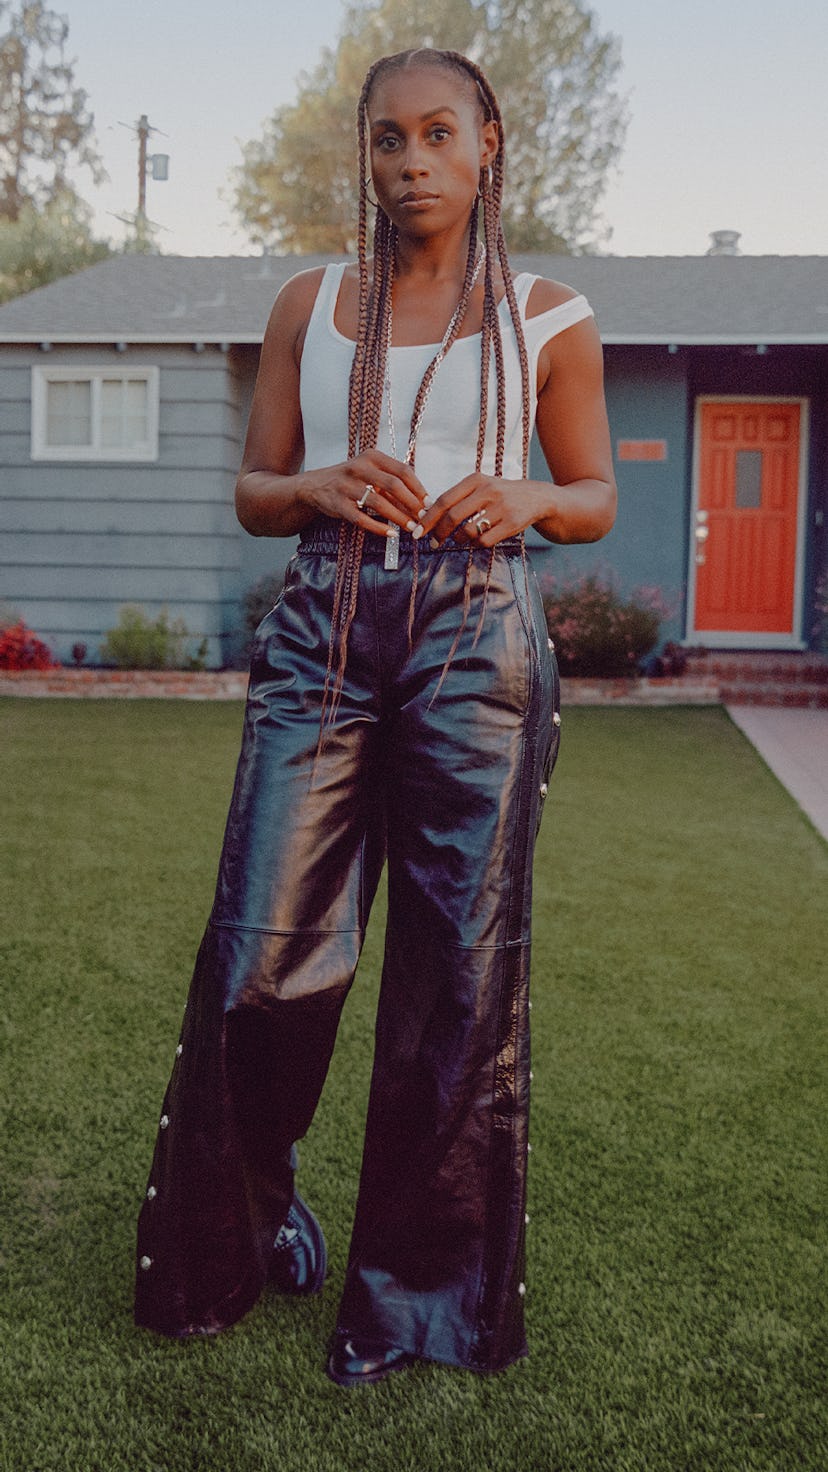 American actress, writer, producer and comedian Issa Rae in a garden